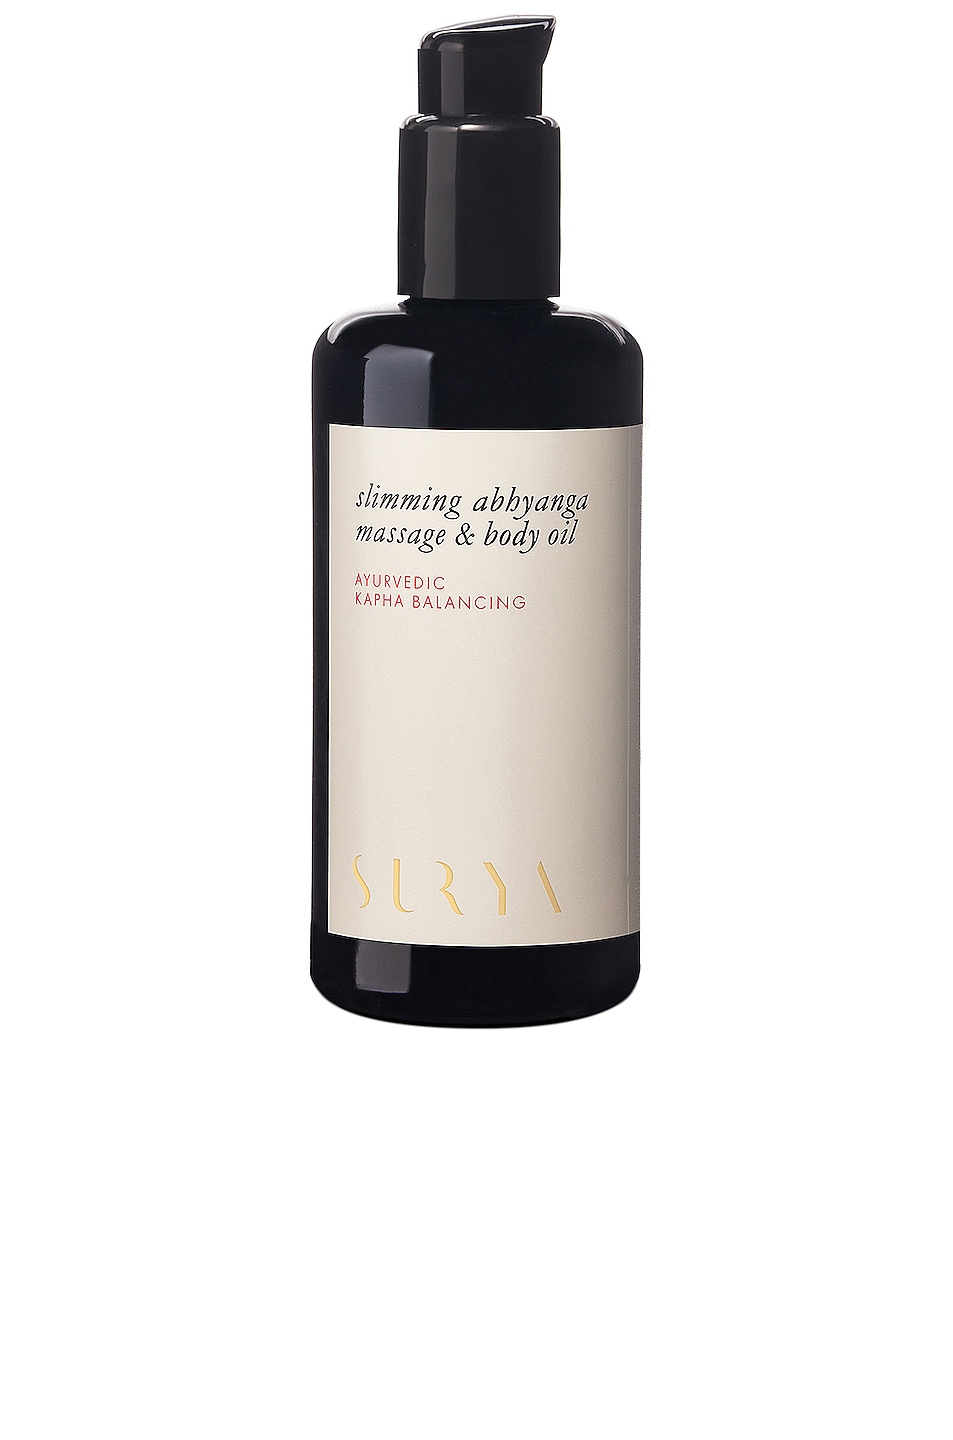 Slimming Body & Massage Oil in Beauty: NA